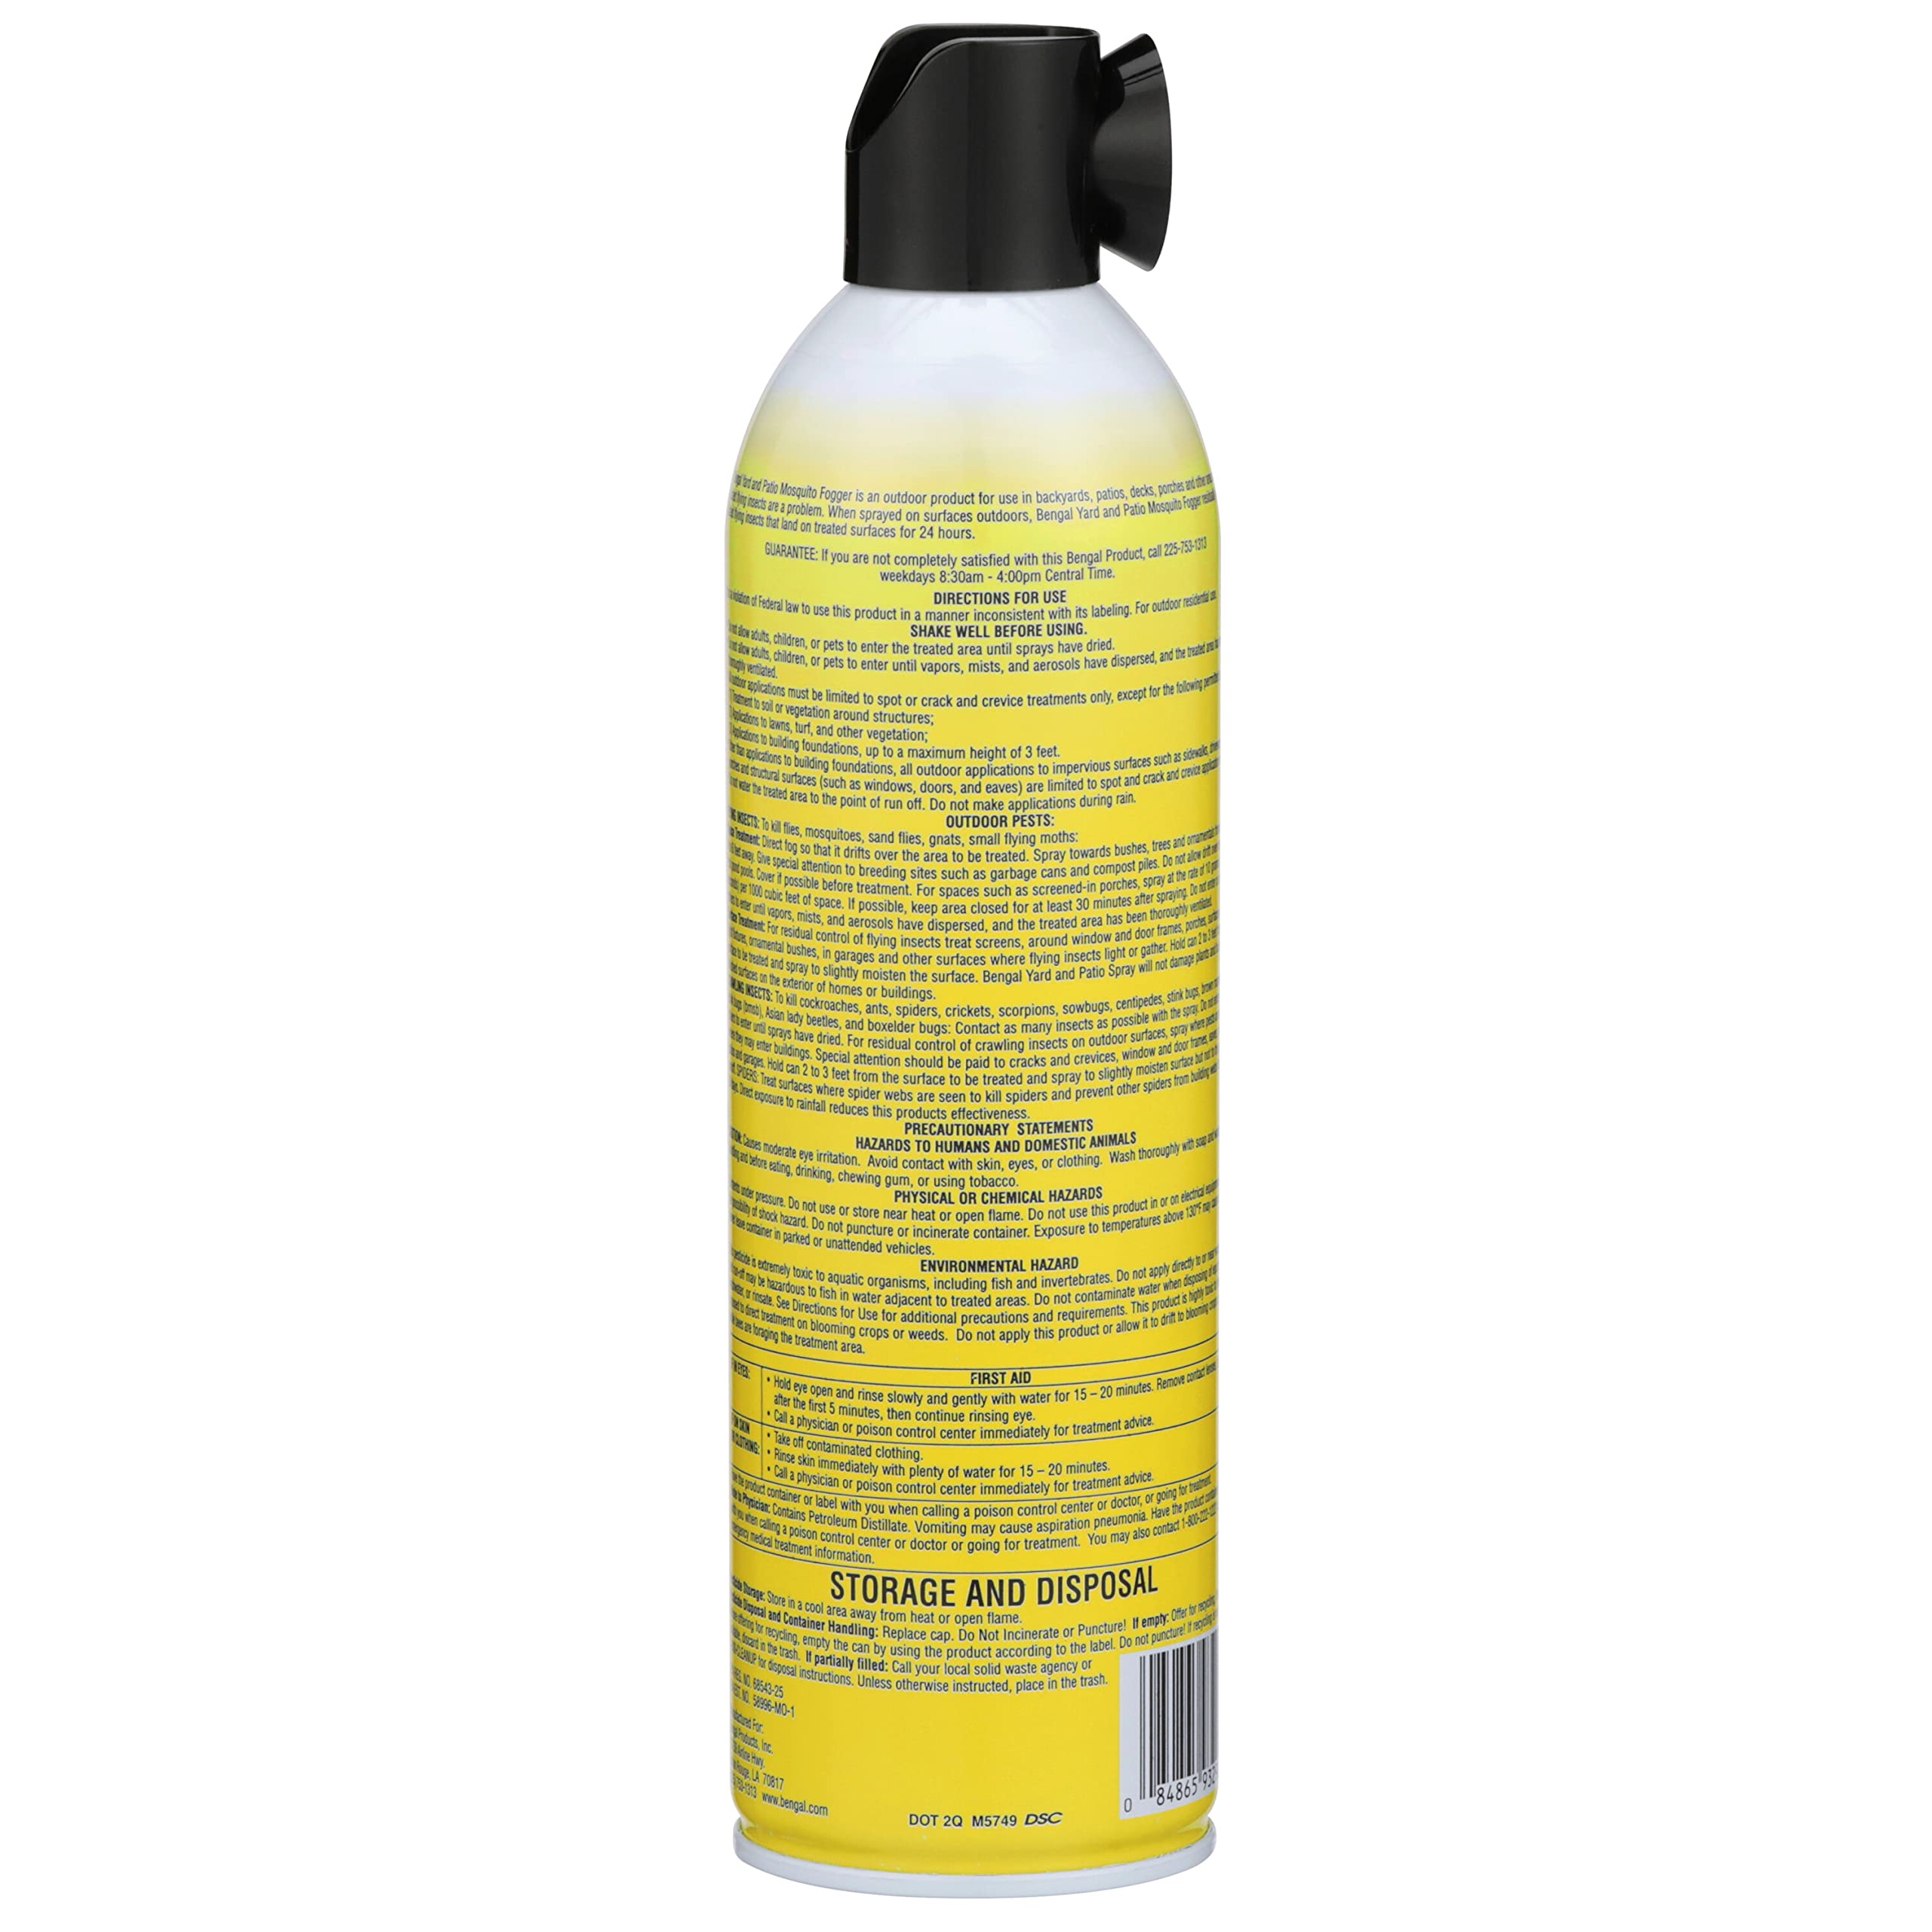 Bengal Yard and Patio Mosquito Fogger, Kills Spiders and Prevents Nesting, 17 Oz. Aerosol Can